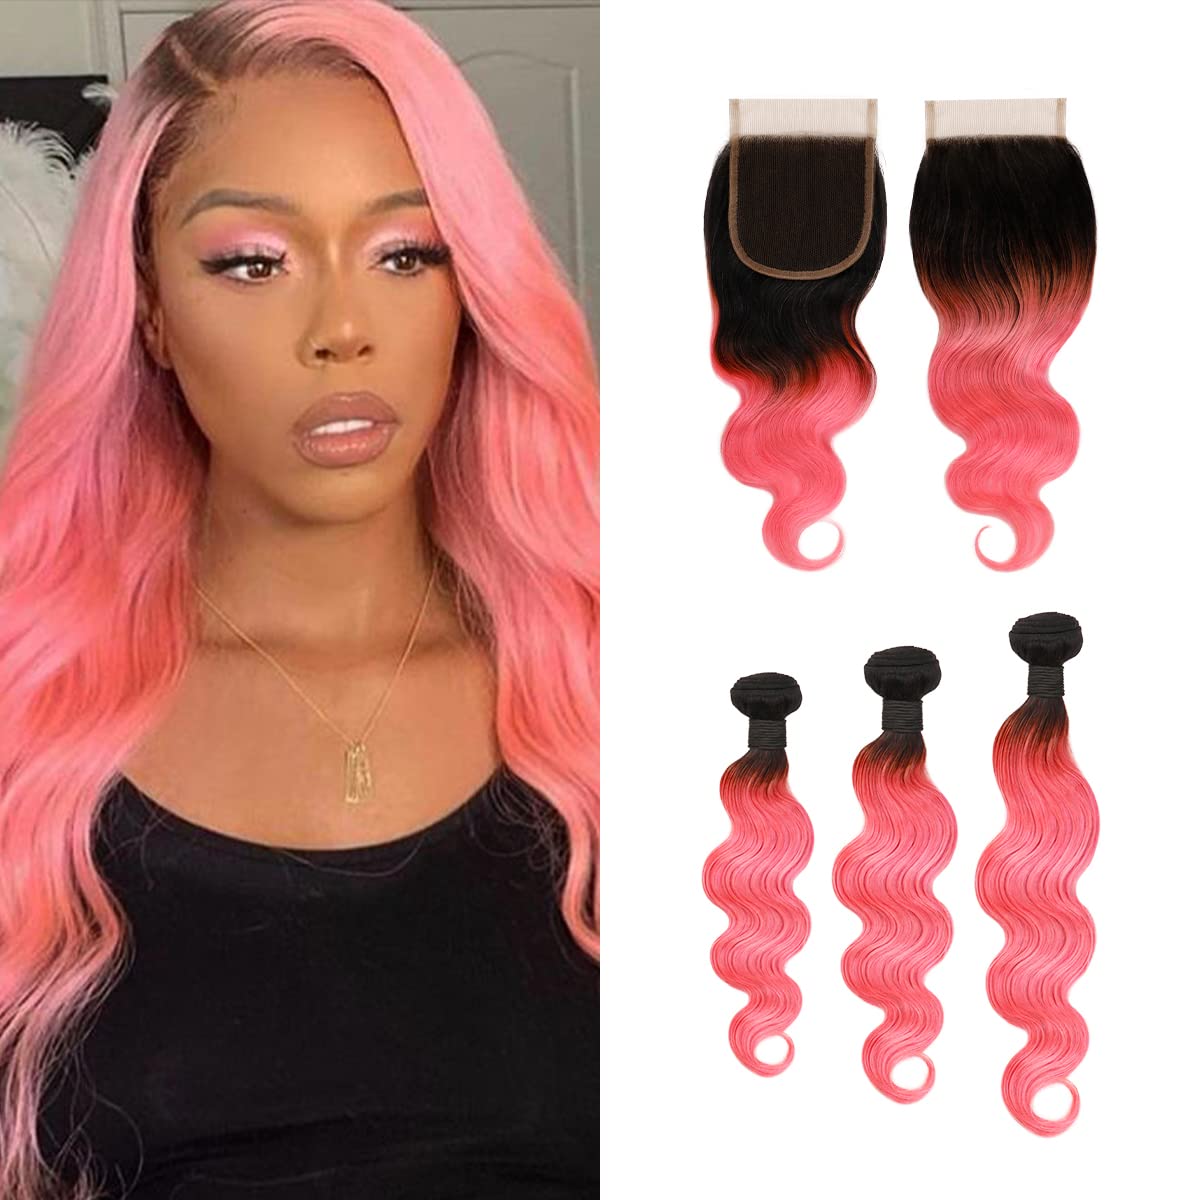 Uniq Hair 9A Brazilian Natural Body wave Bundle with Closure Virgin Unprocessed Human Hair HD Swiss Lace Transparent Frontal Hand tied Wefts Extensions Pre-Colored Weaves Find Your New Look Today!